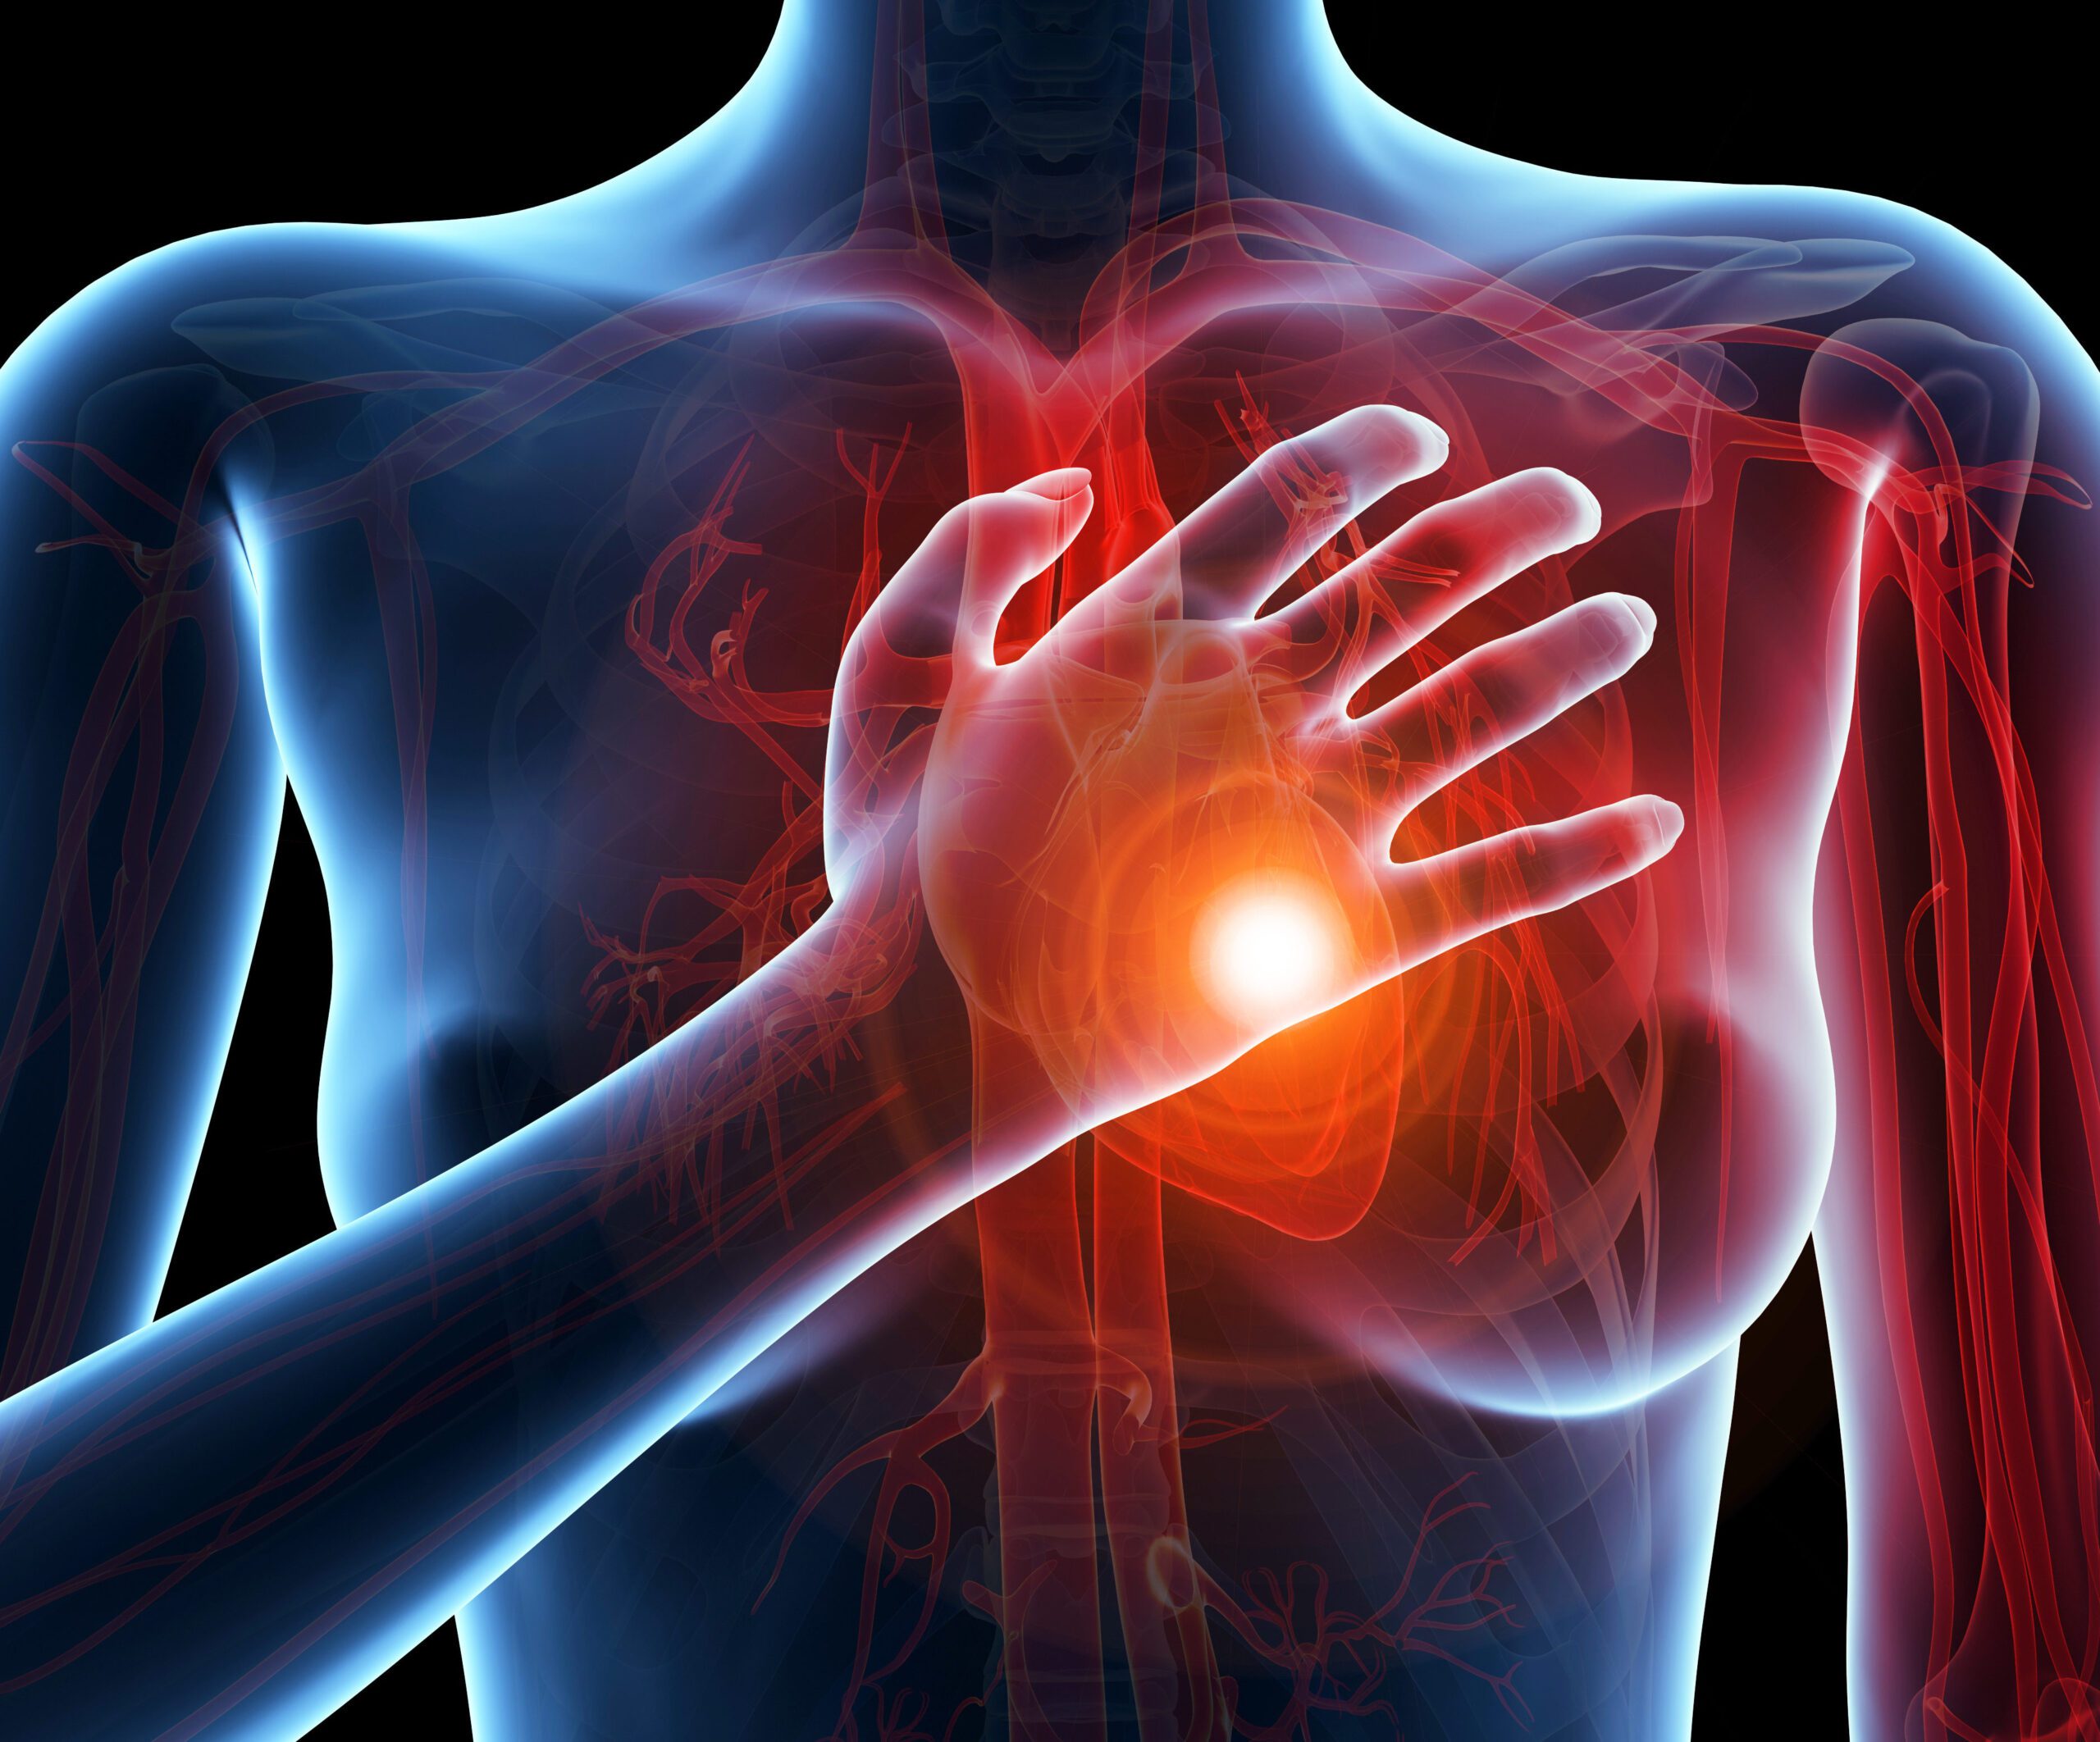 Heart Failure: Symptoms Not to Ignore